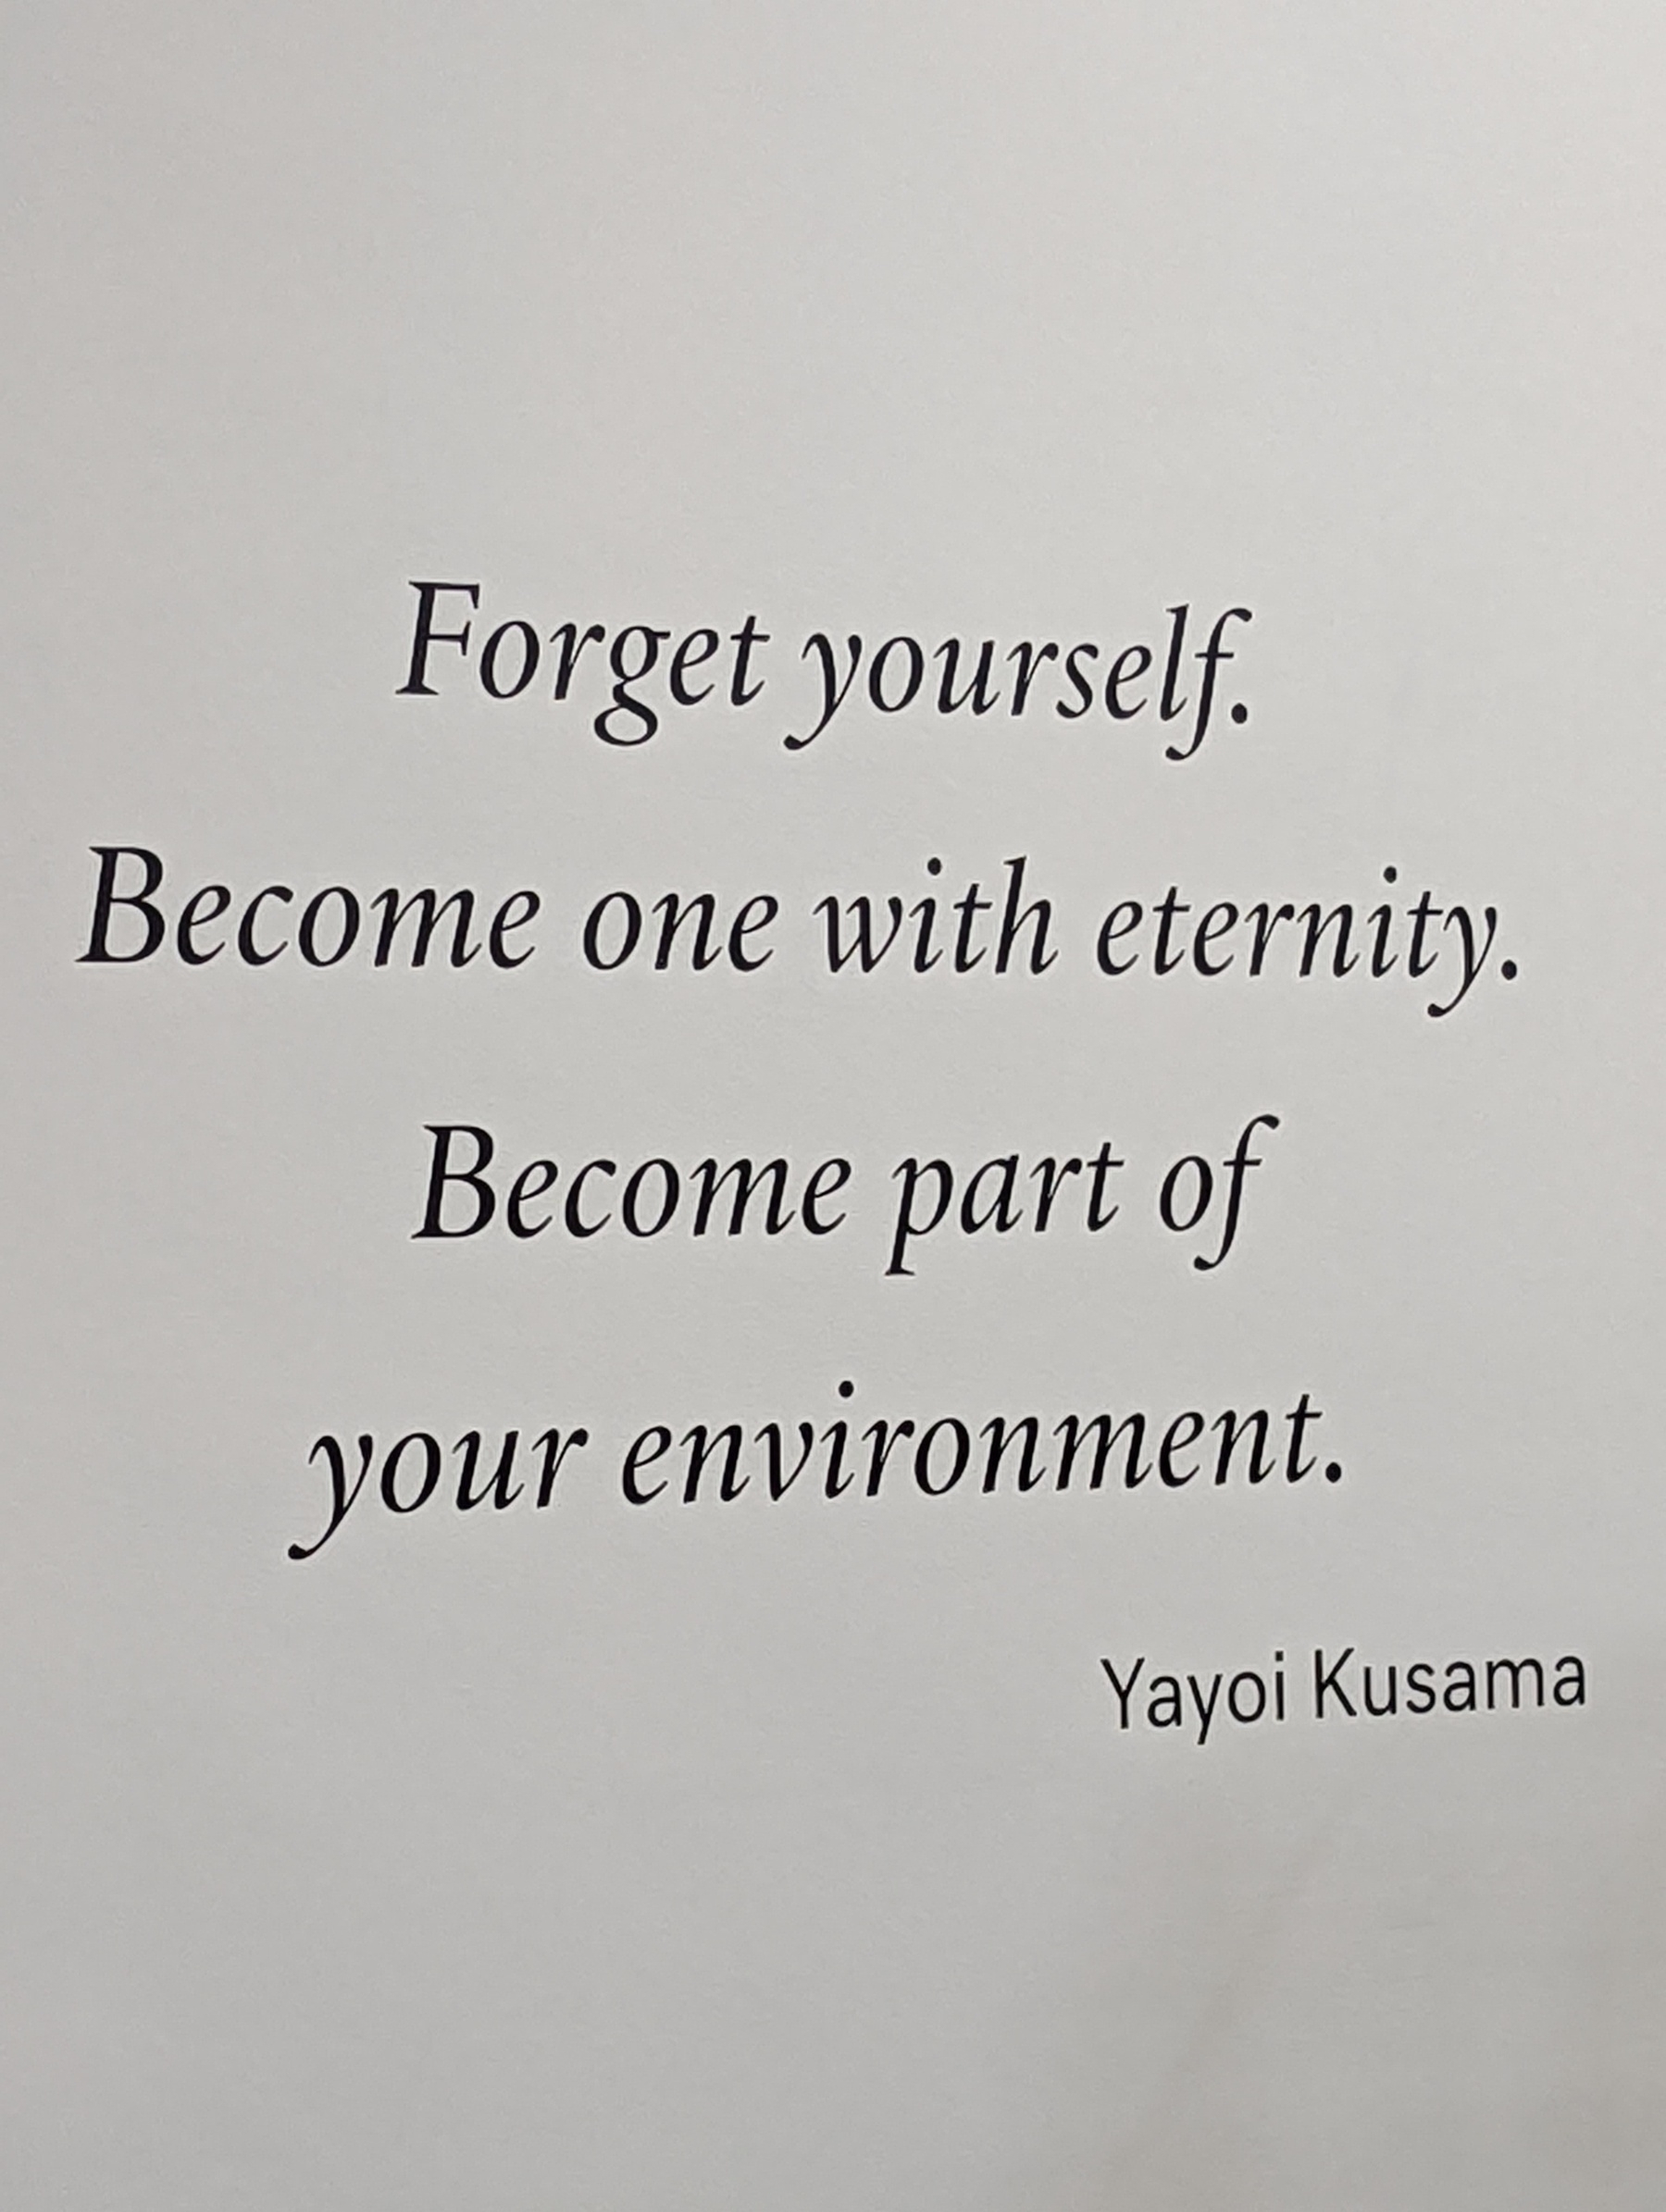 A sign quotes the artist Yayoi Kusama: Forget yourself. Become one with eternity. Become part of your environment.